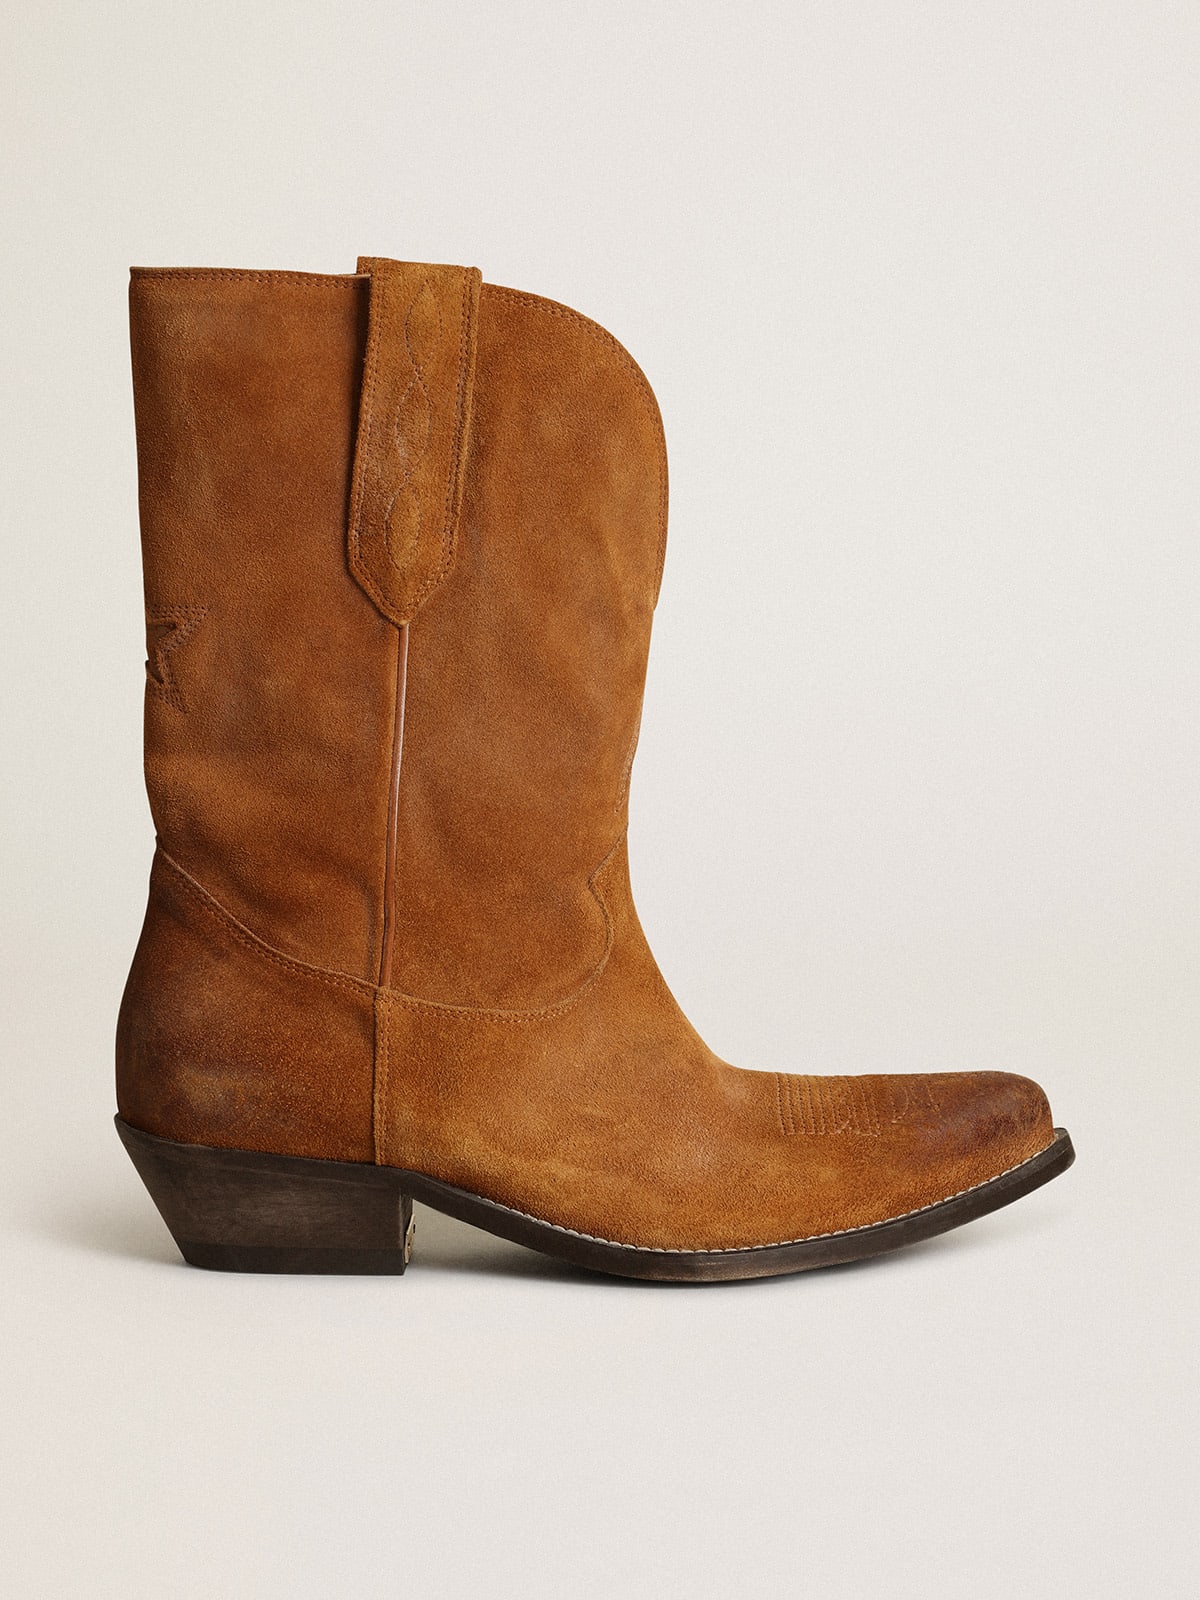 Low Wish Star boots in tobacco-colored suede with inlay star